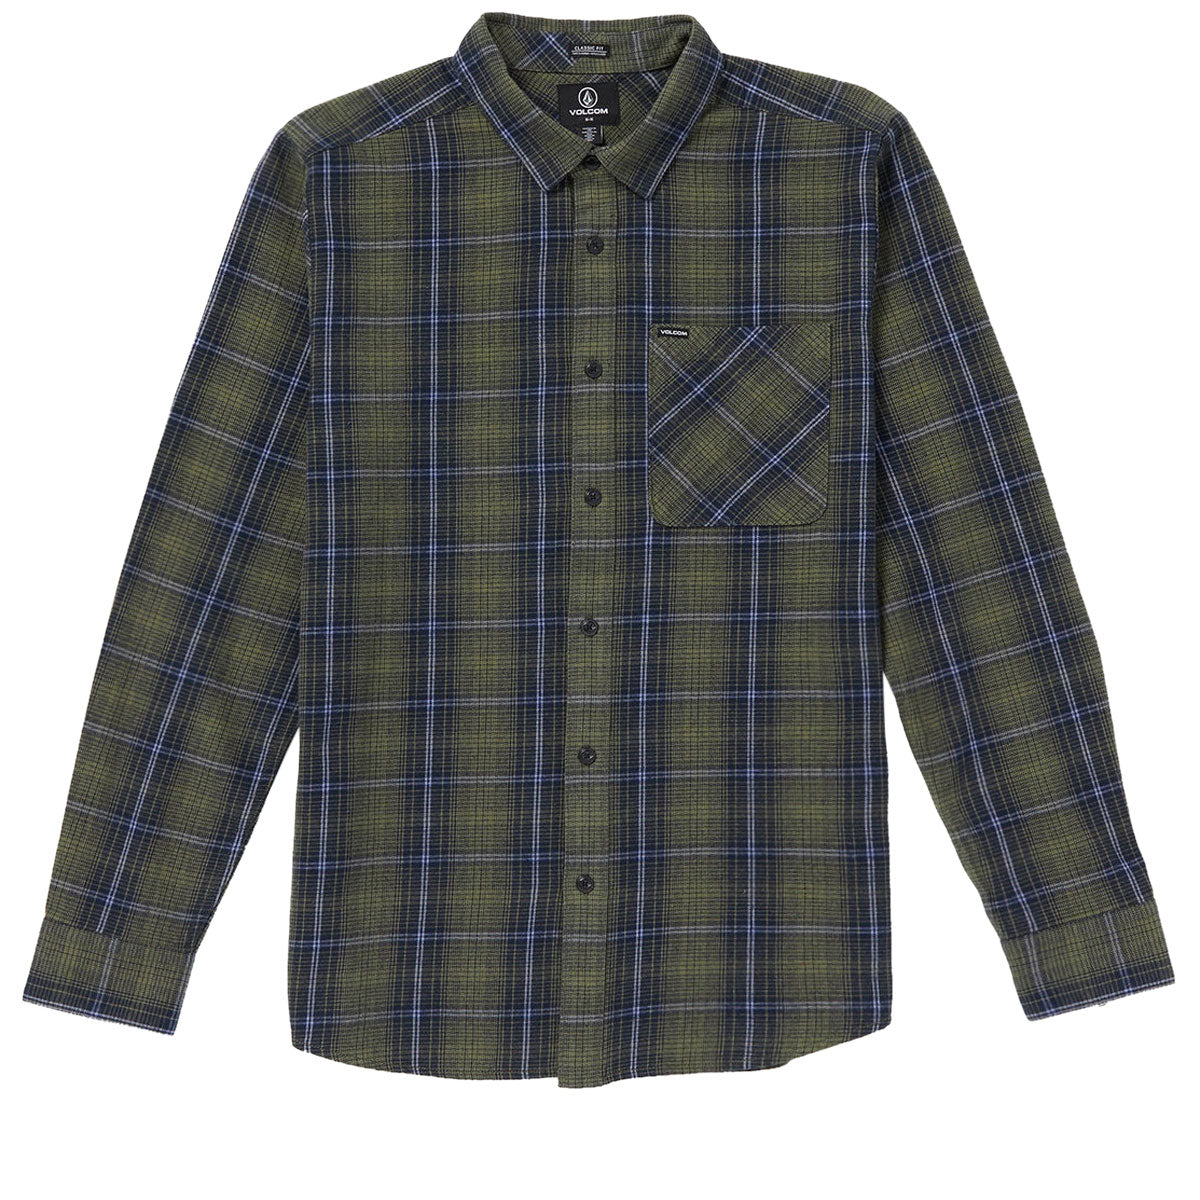 Volcom Heavy Twills Flannel Long Sleeve Shirt - Old Mill image 1